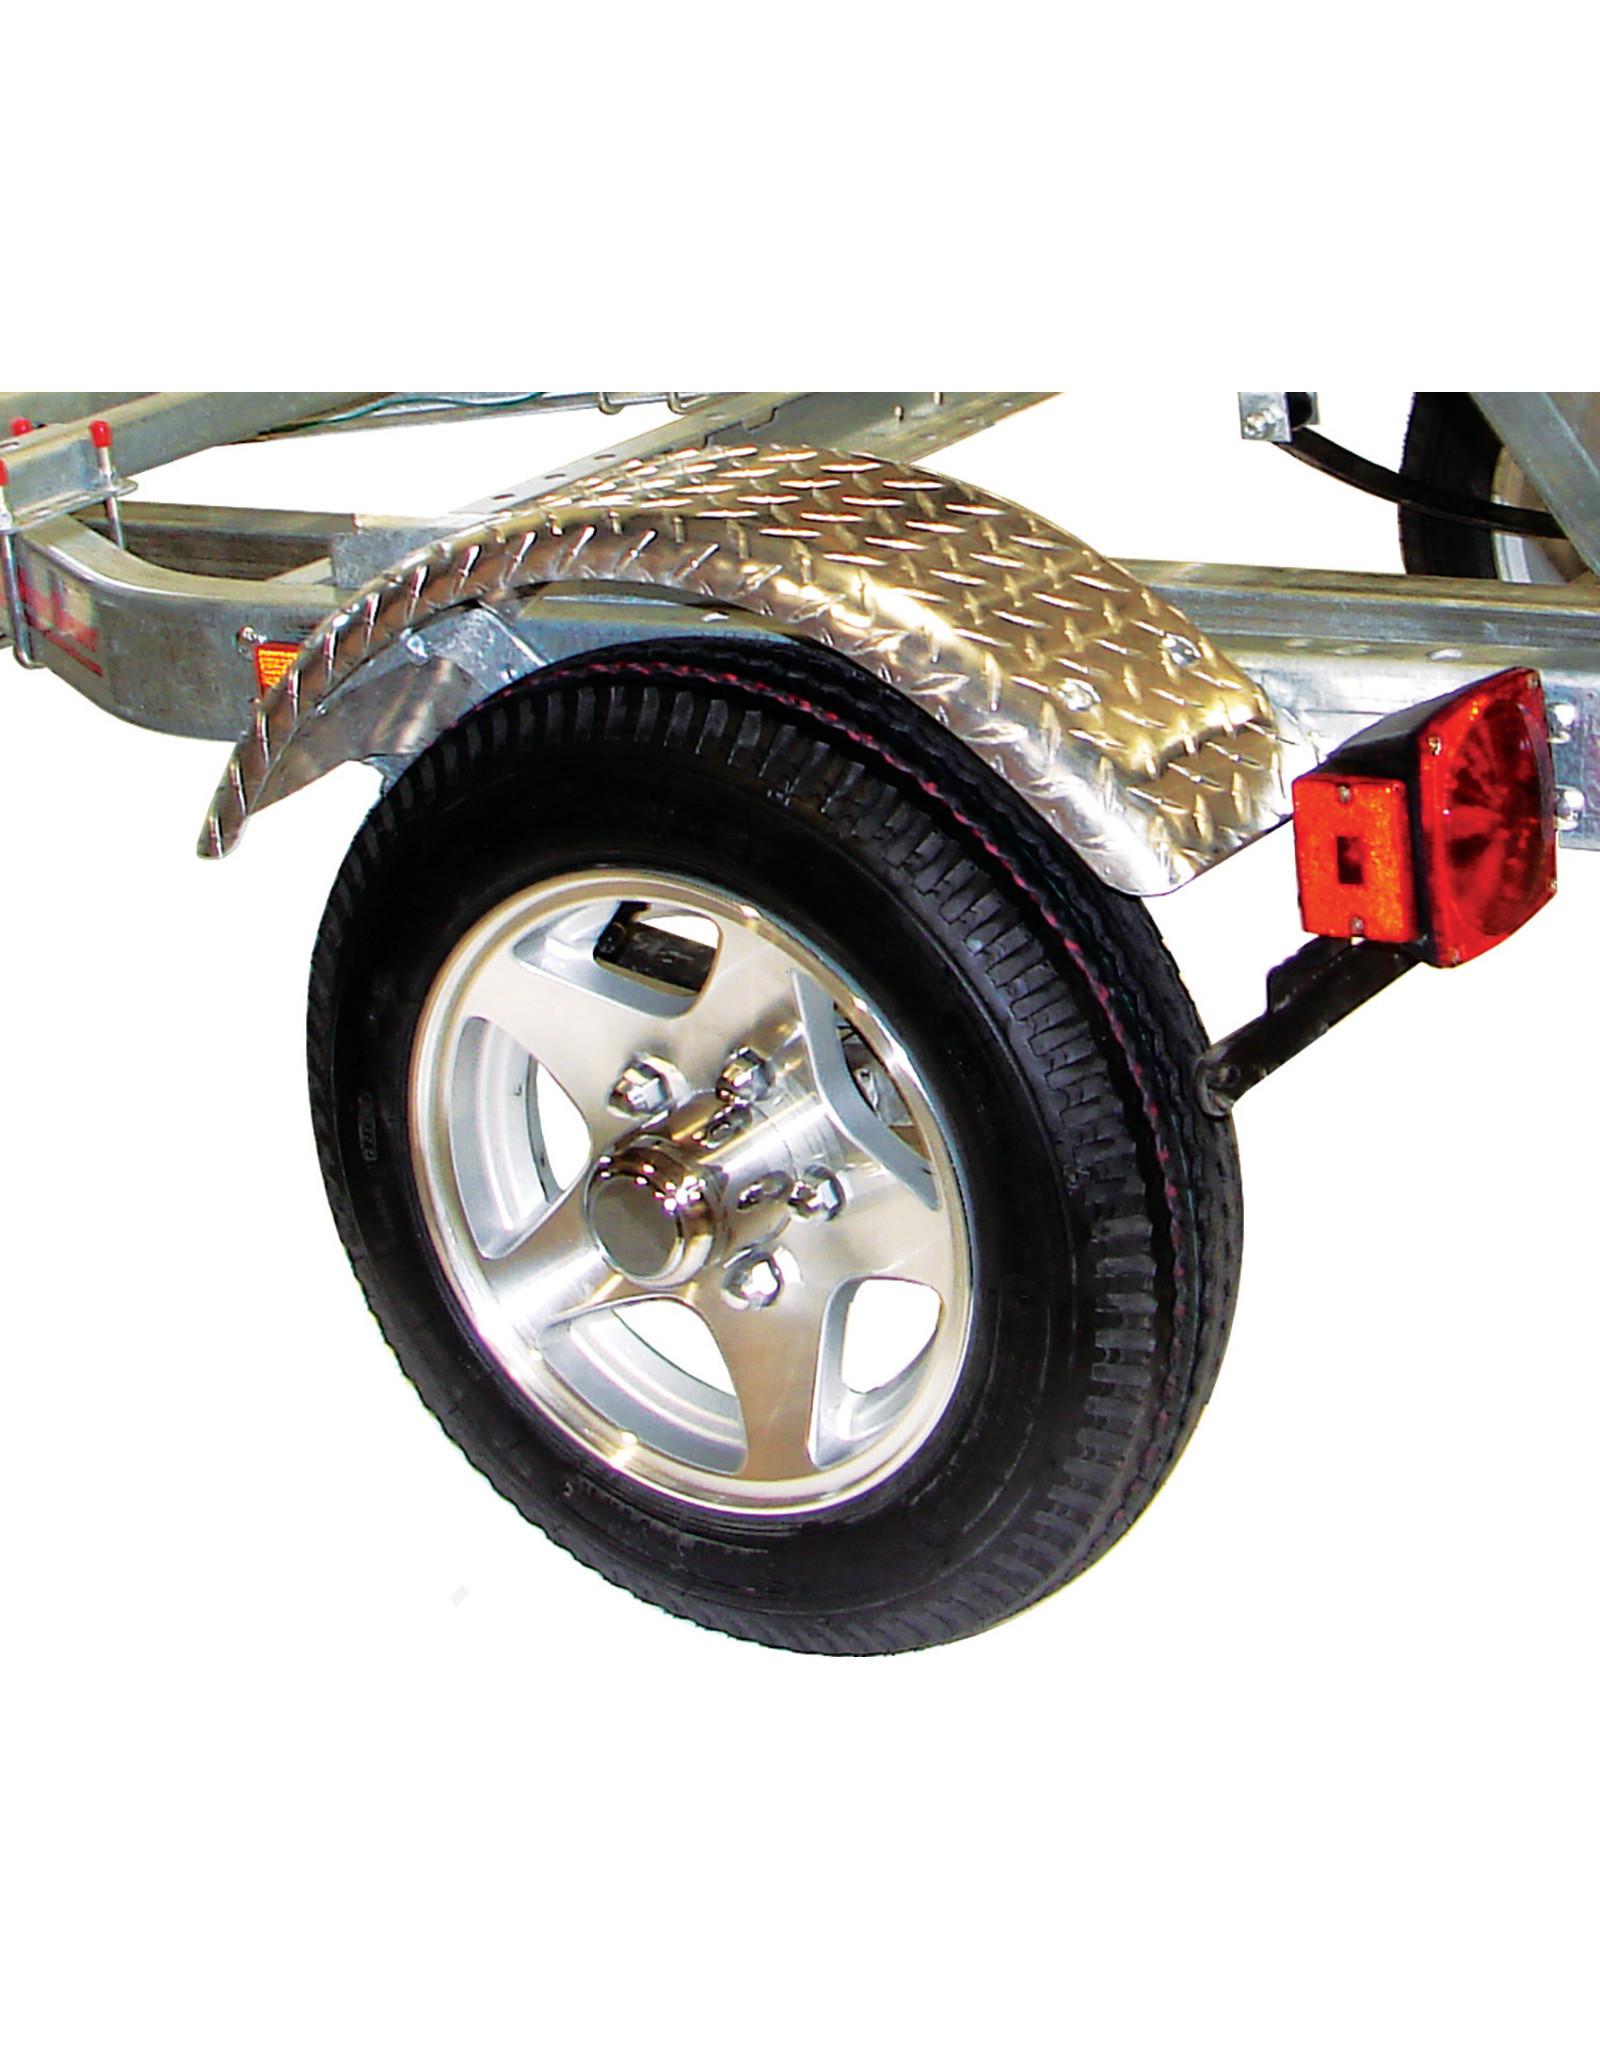 Malone Auto Rack Malone MicroSport™XT Trailer with Aluminum Wheels and Retractable Tongue Kit